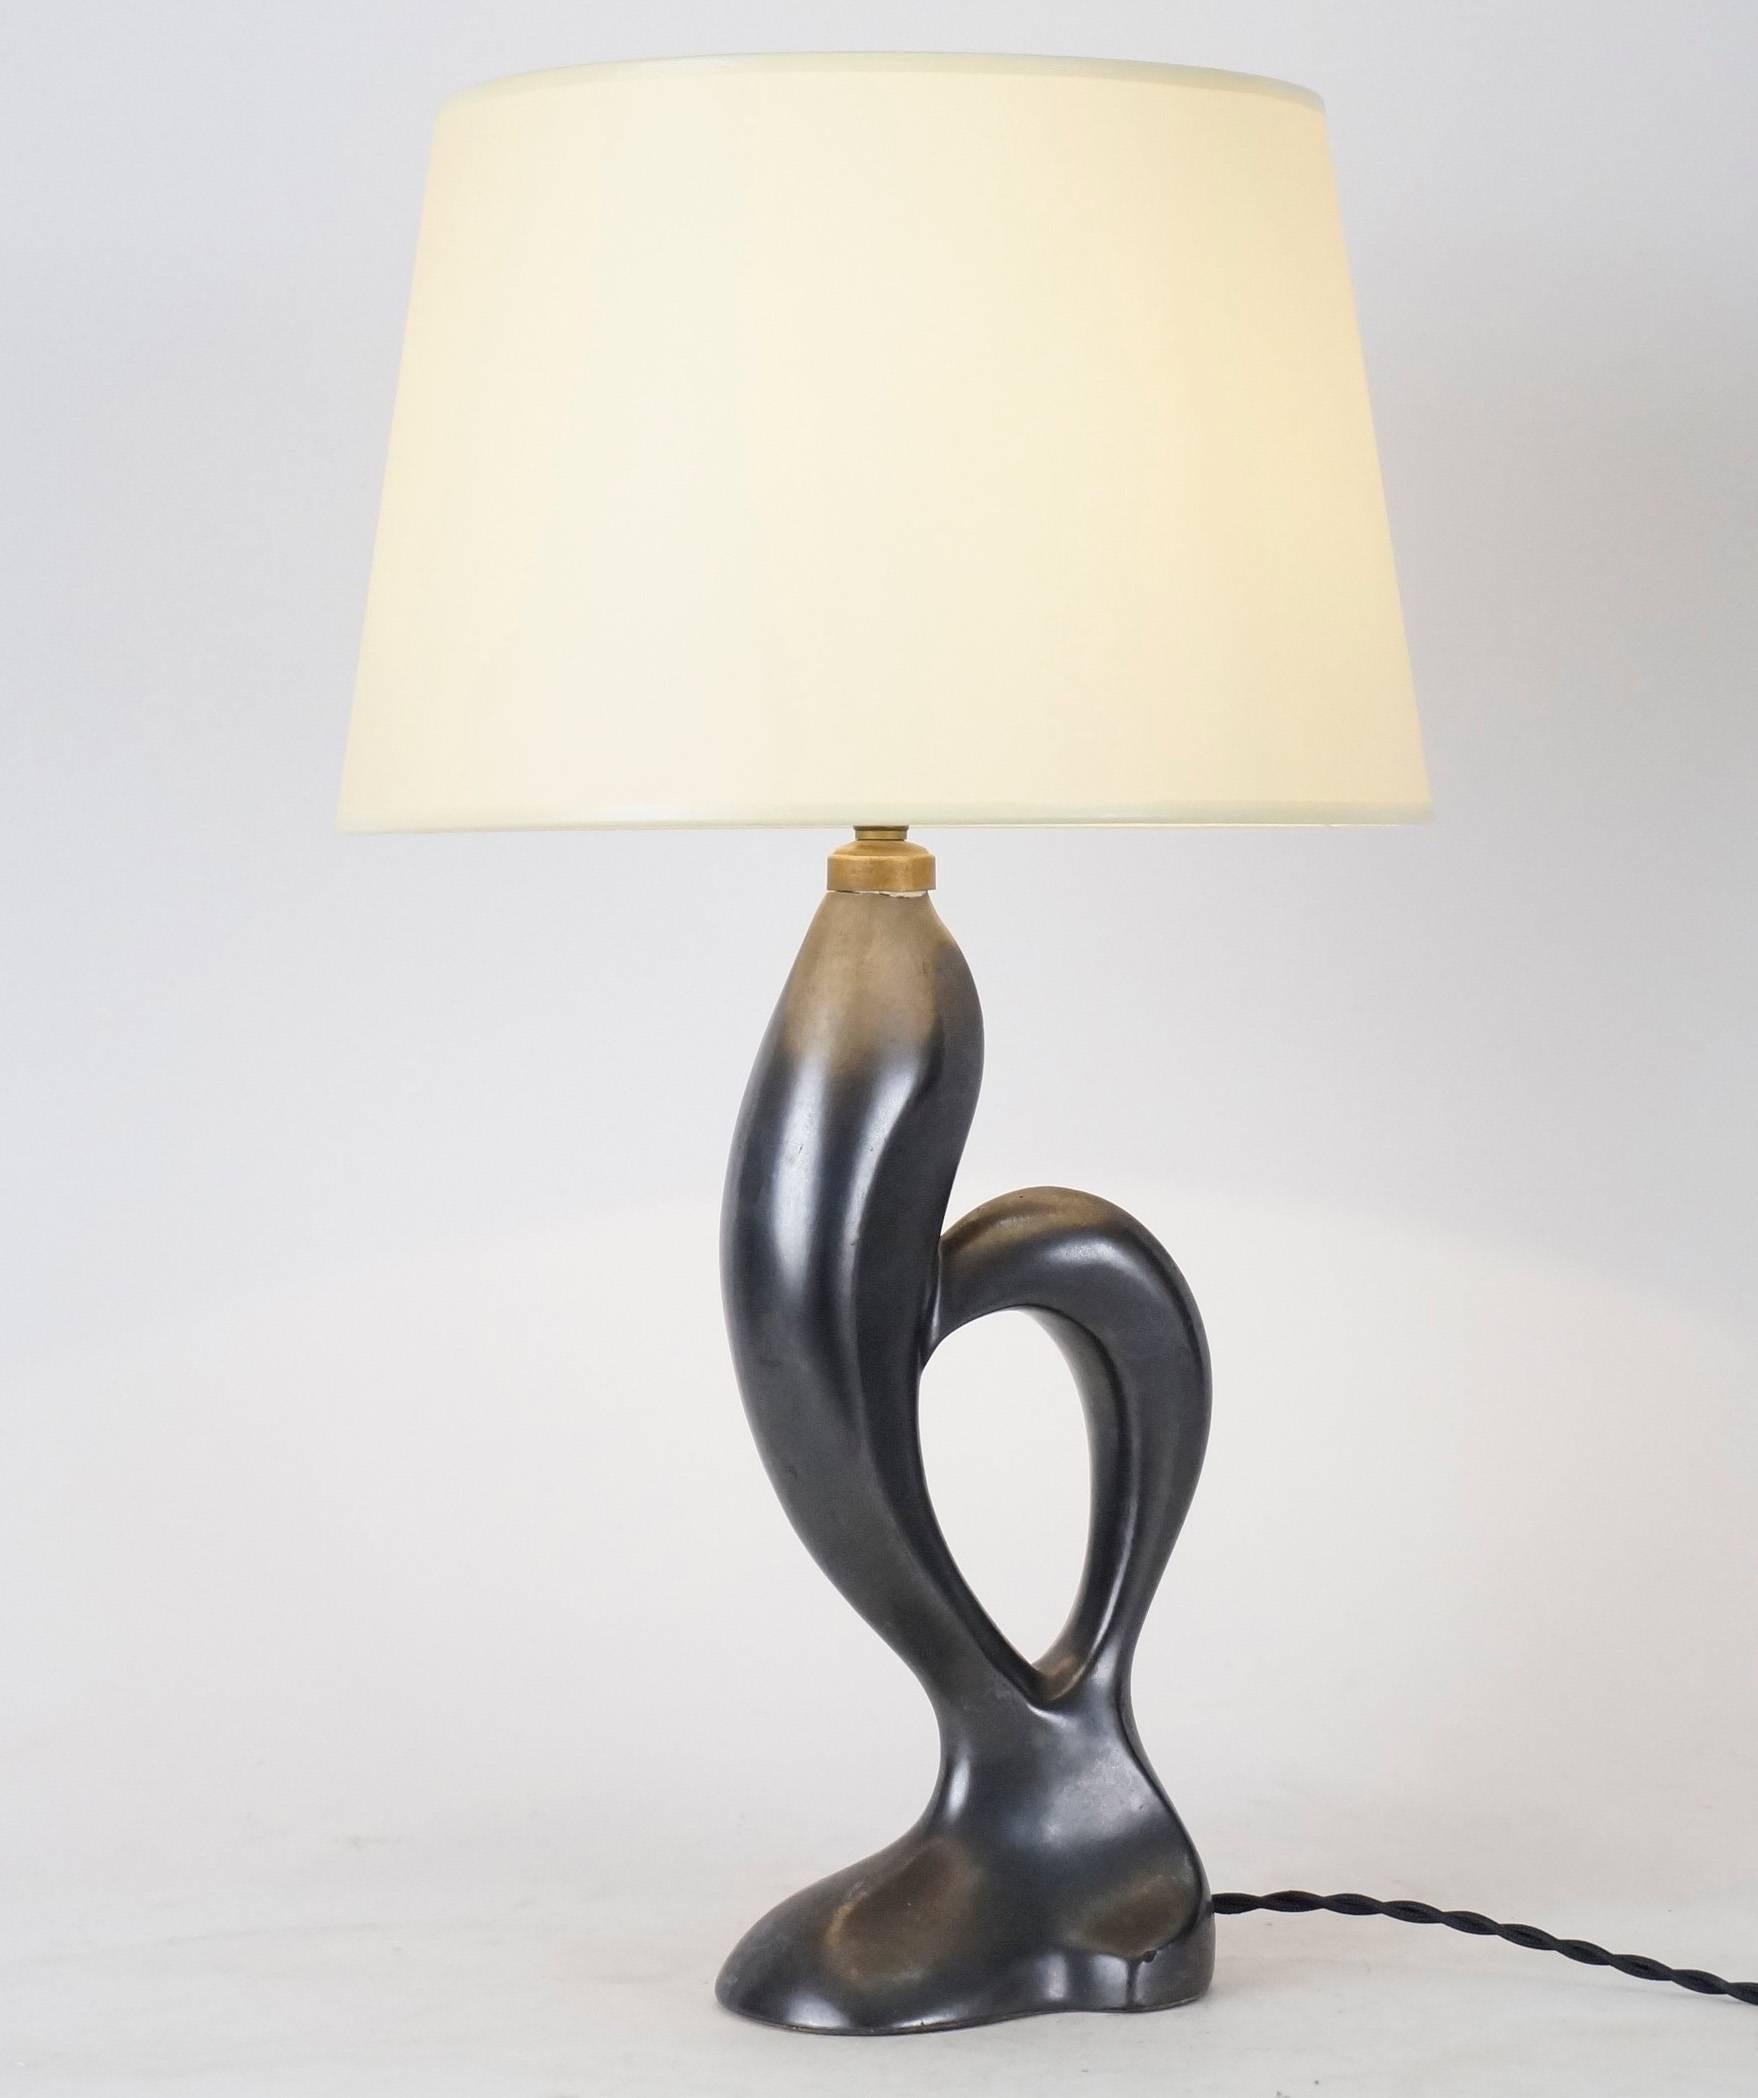 Zoomorphic black satin ceramic table lamps, custom-made fabric lampshade, rewired with twisted silk cord.
US standard plug on request.
Ceramic body height: 26 cm – 10.3 in.
Height with lampshade: 44 cm – 16.3 in.
 